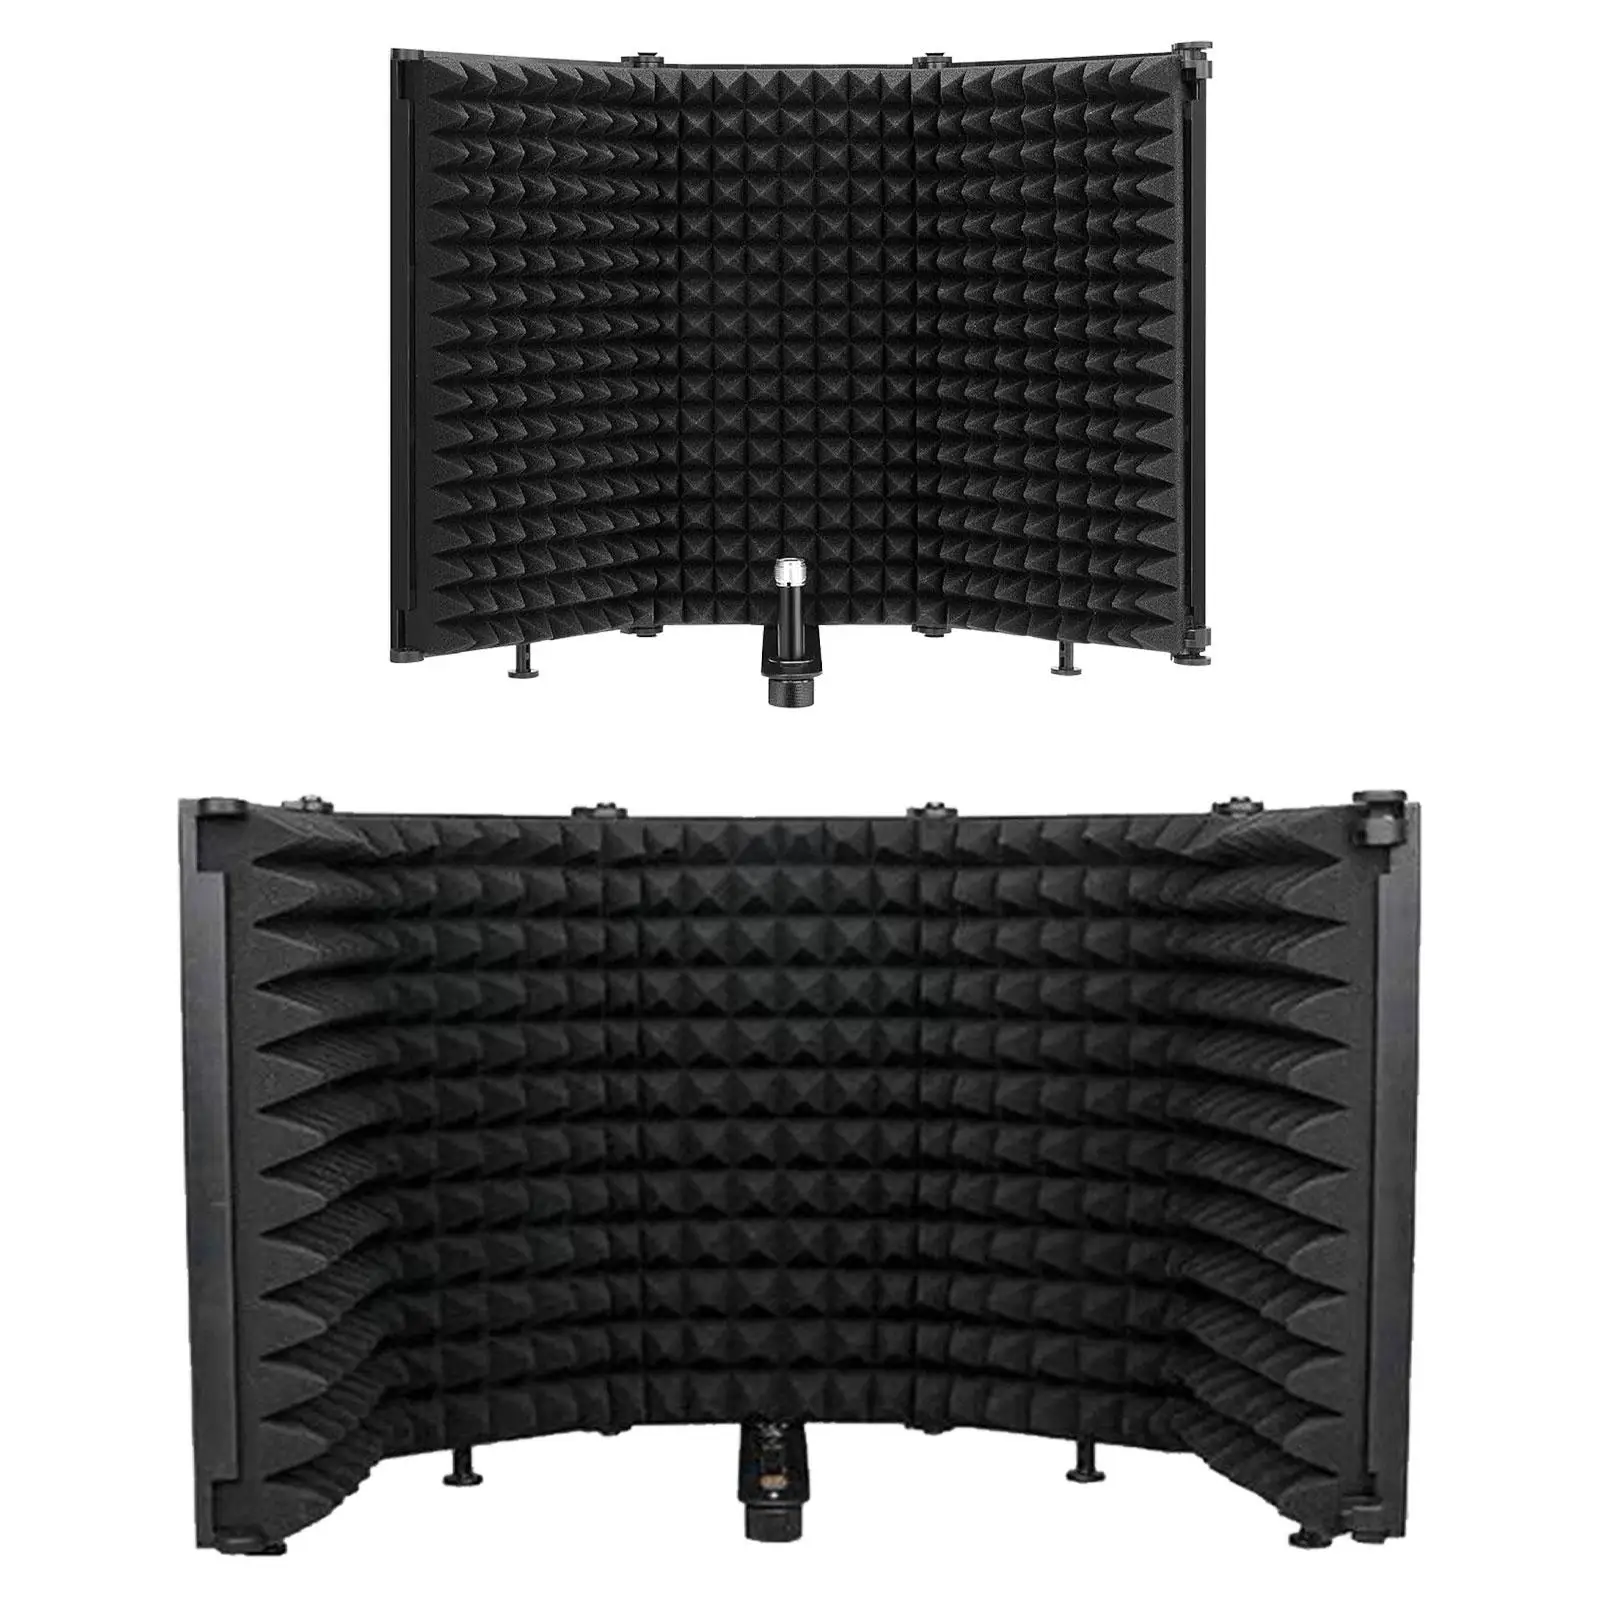 

Microphone Shield Acoustic Sheild Sound Insulation Adjustable Wind Screen for Studio Create Broadcasting Daily Use Singing